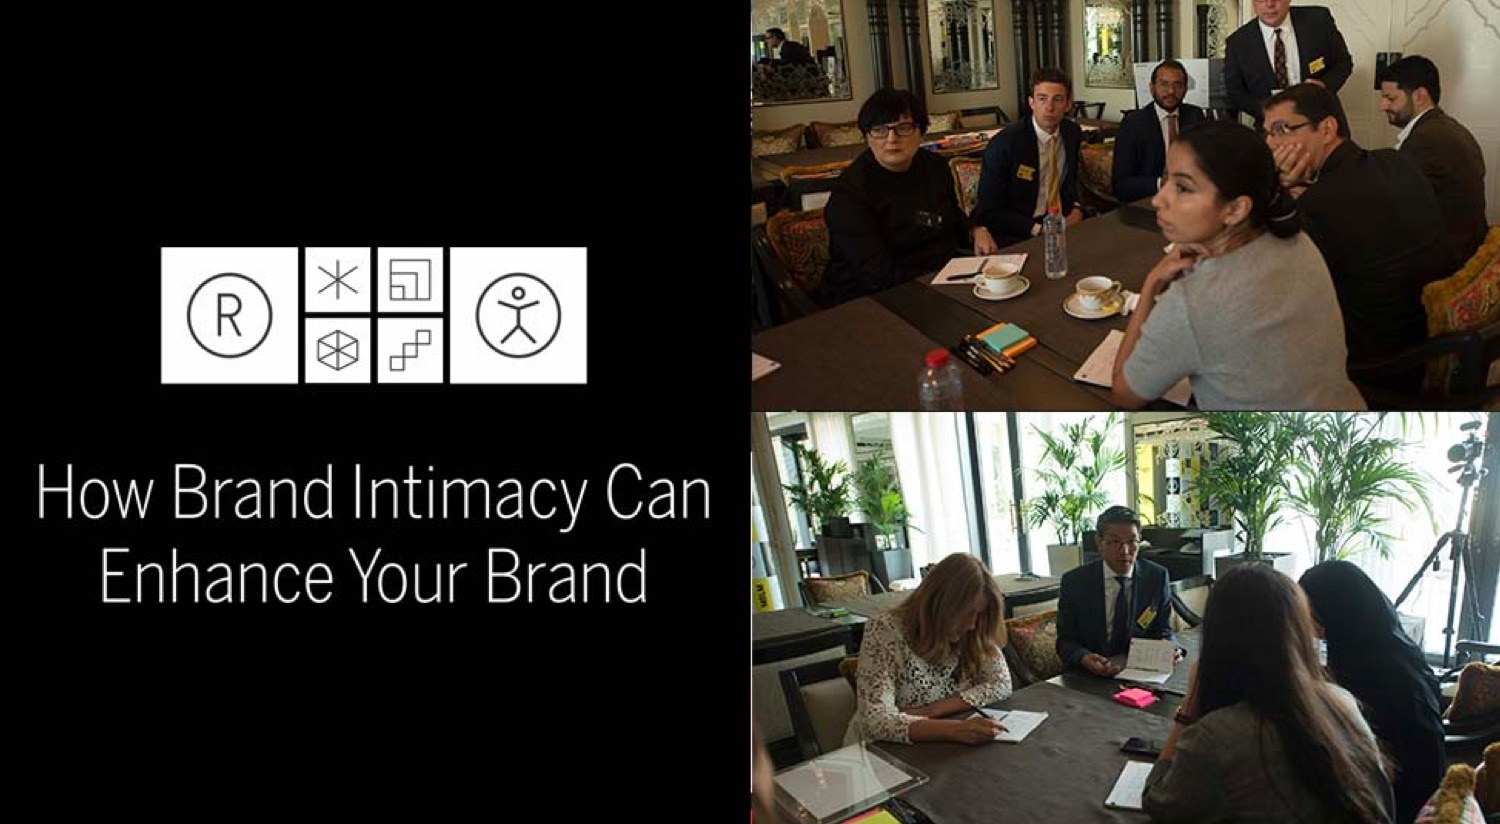 Enhance brand intimacy with this book.